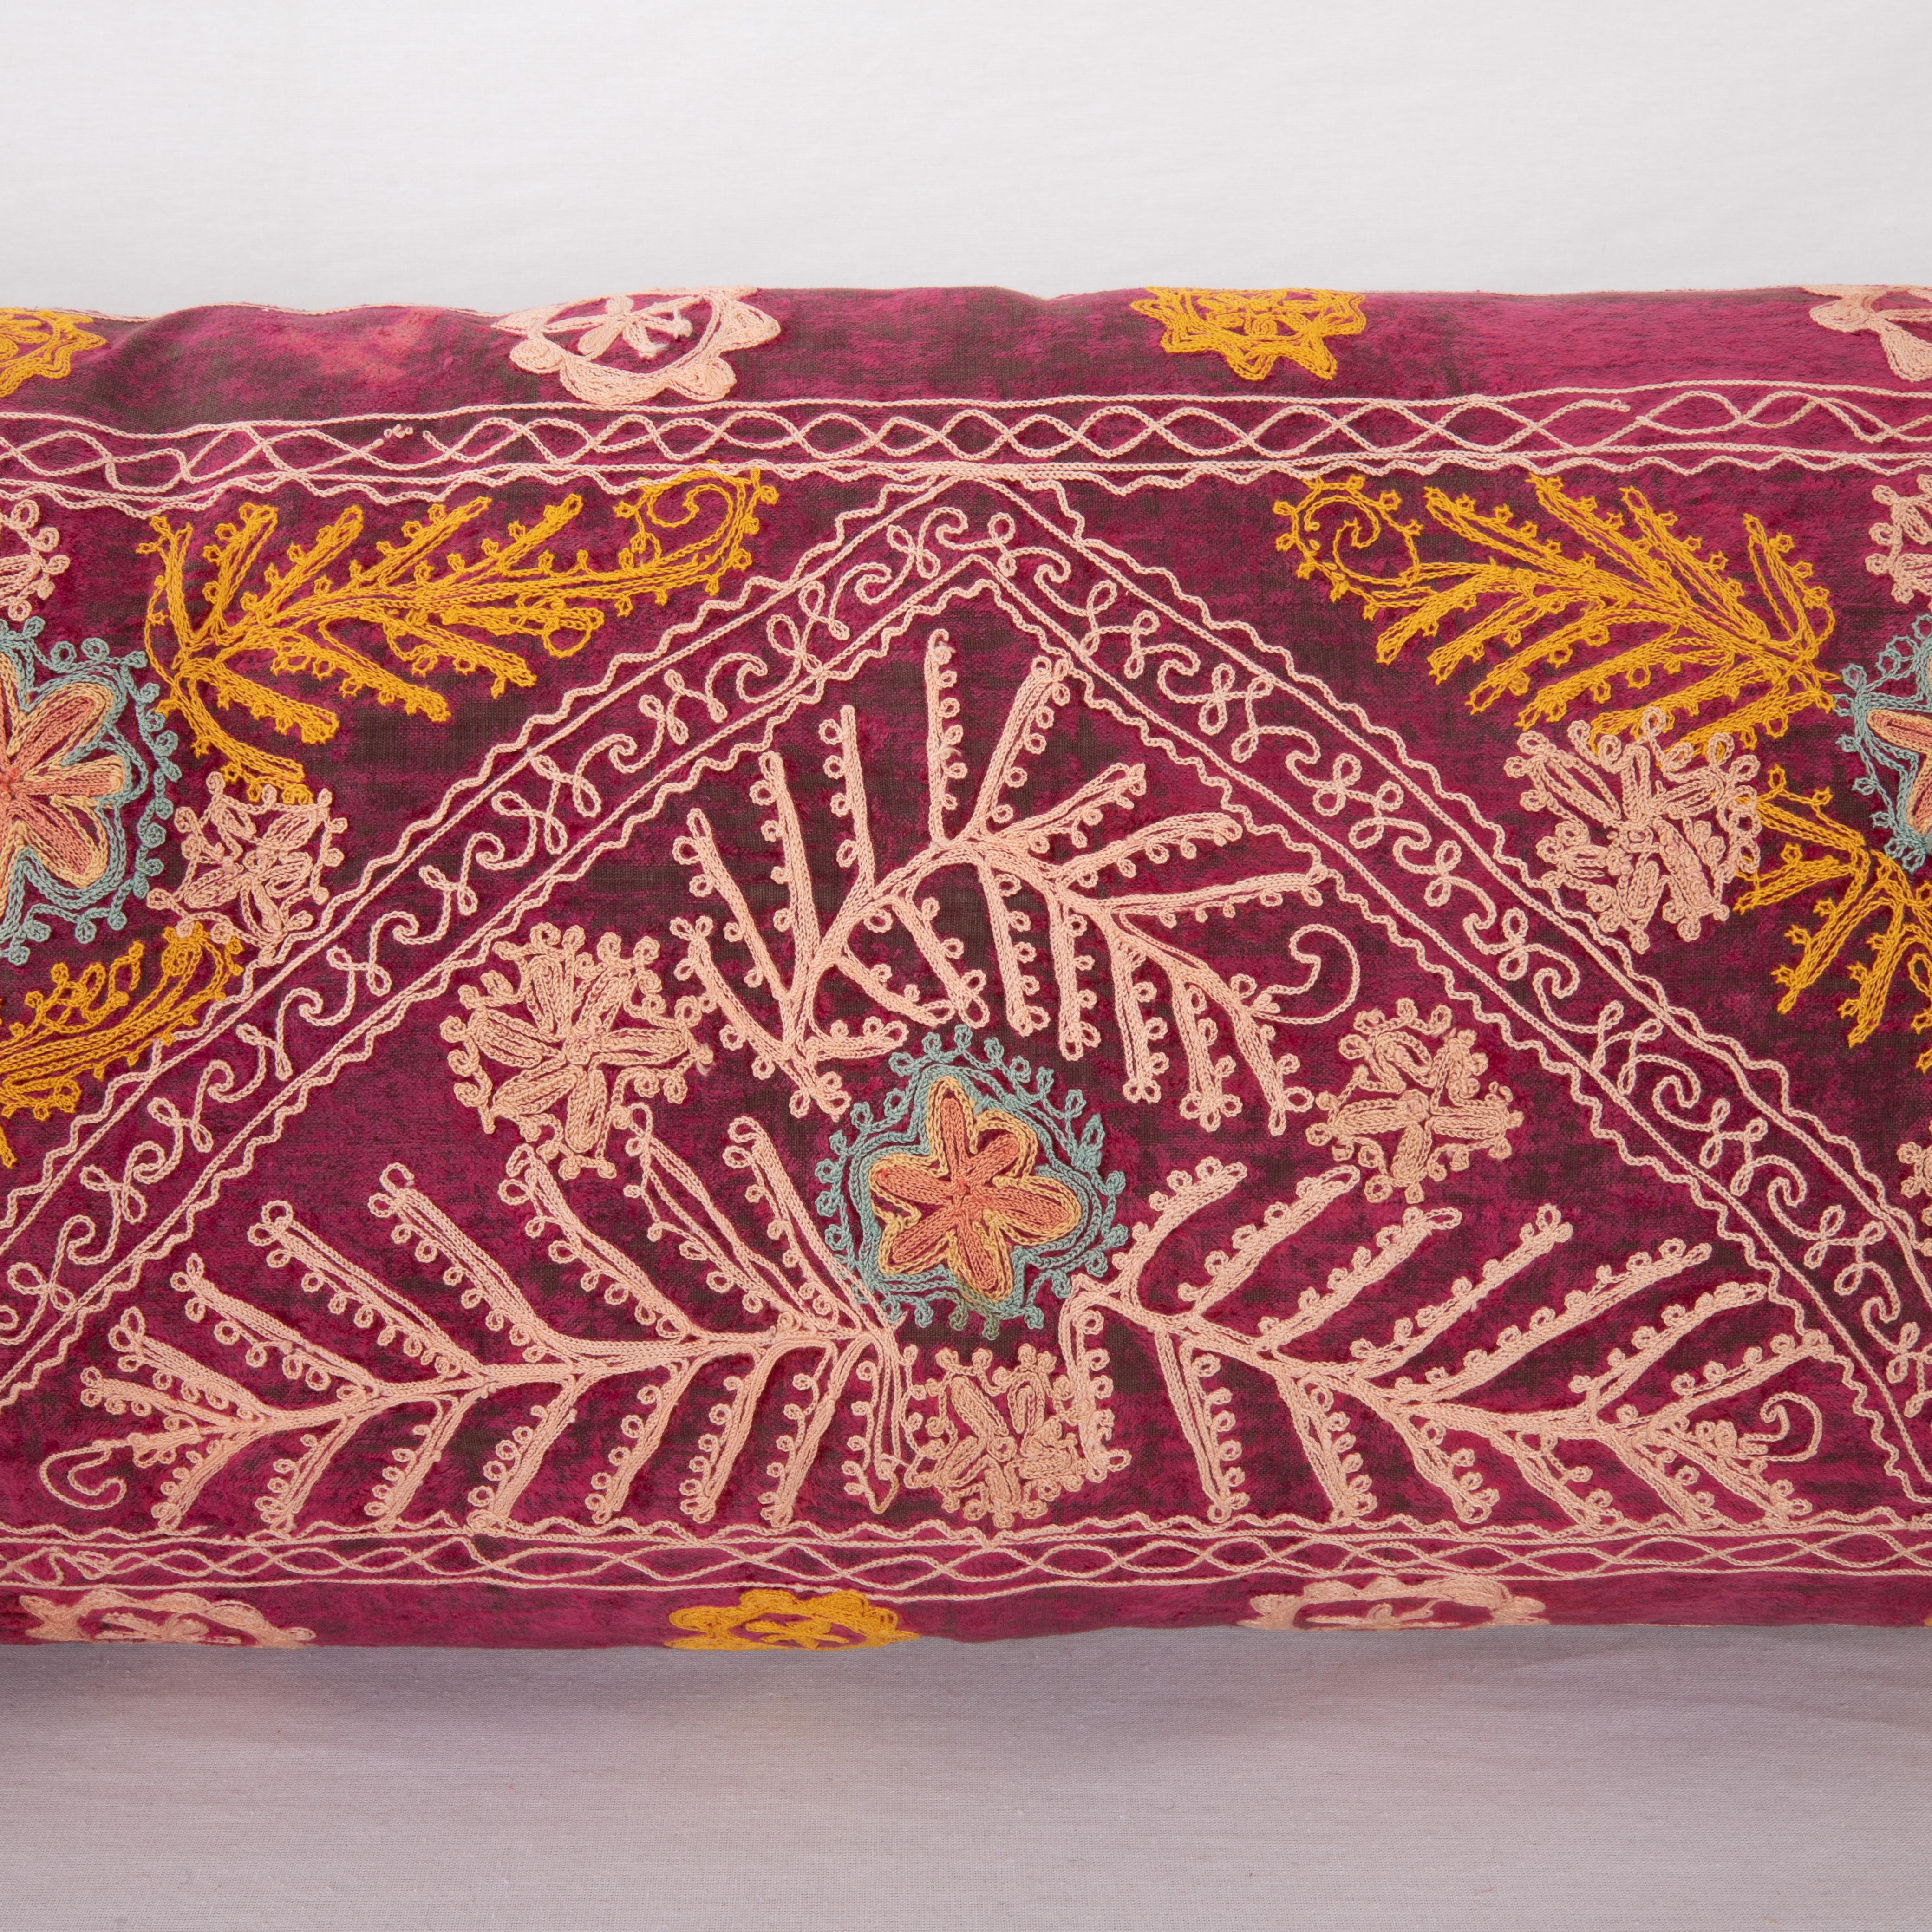 Embroidered Suzani Pillow Case Made from a Vintage Velvet Ground Suzani, Mid-20th Century For Sale